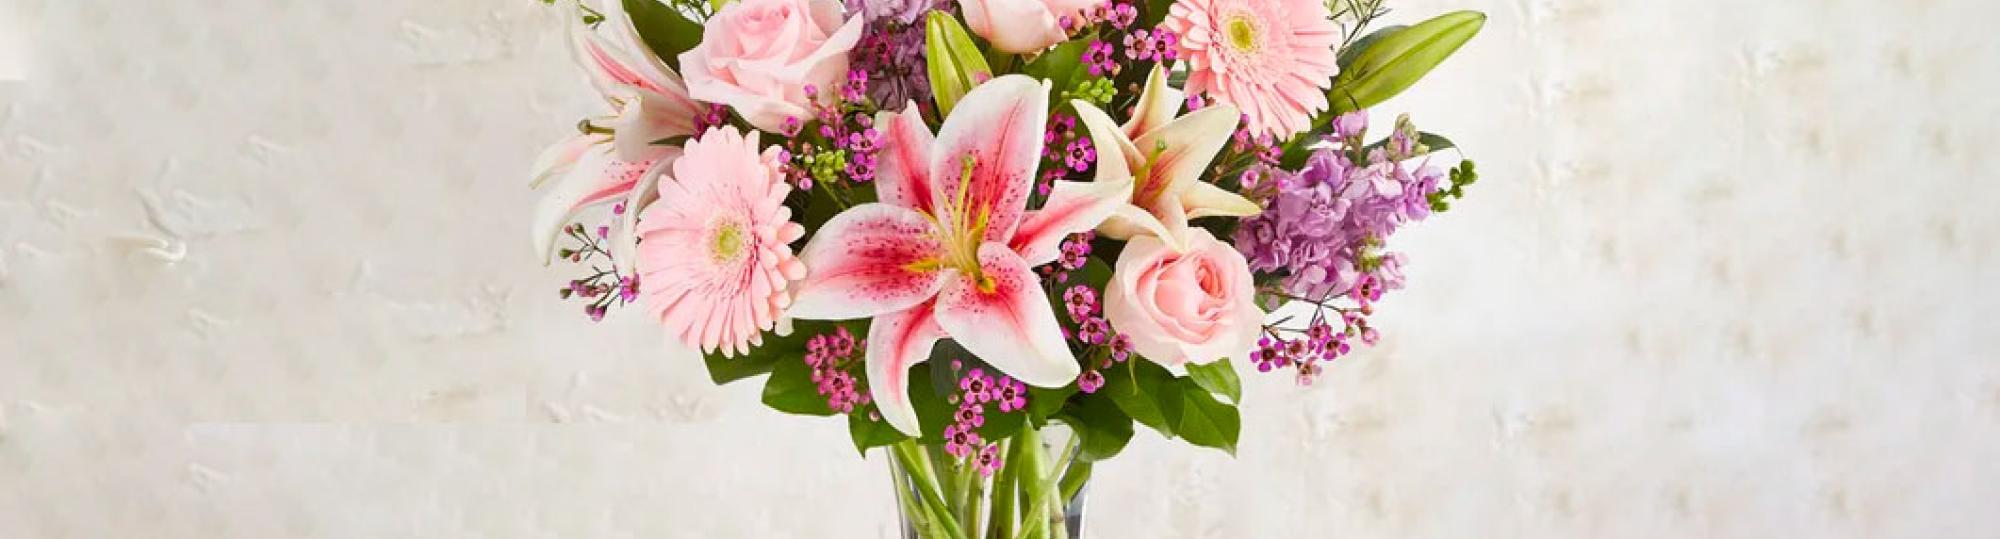 1-800-Flowers.com  Military Discount with Veterans Advantage